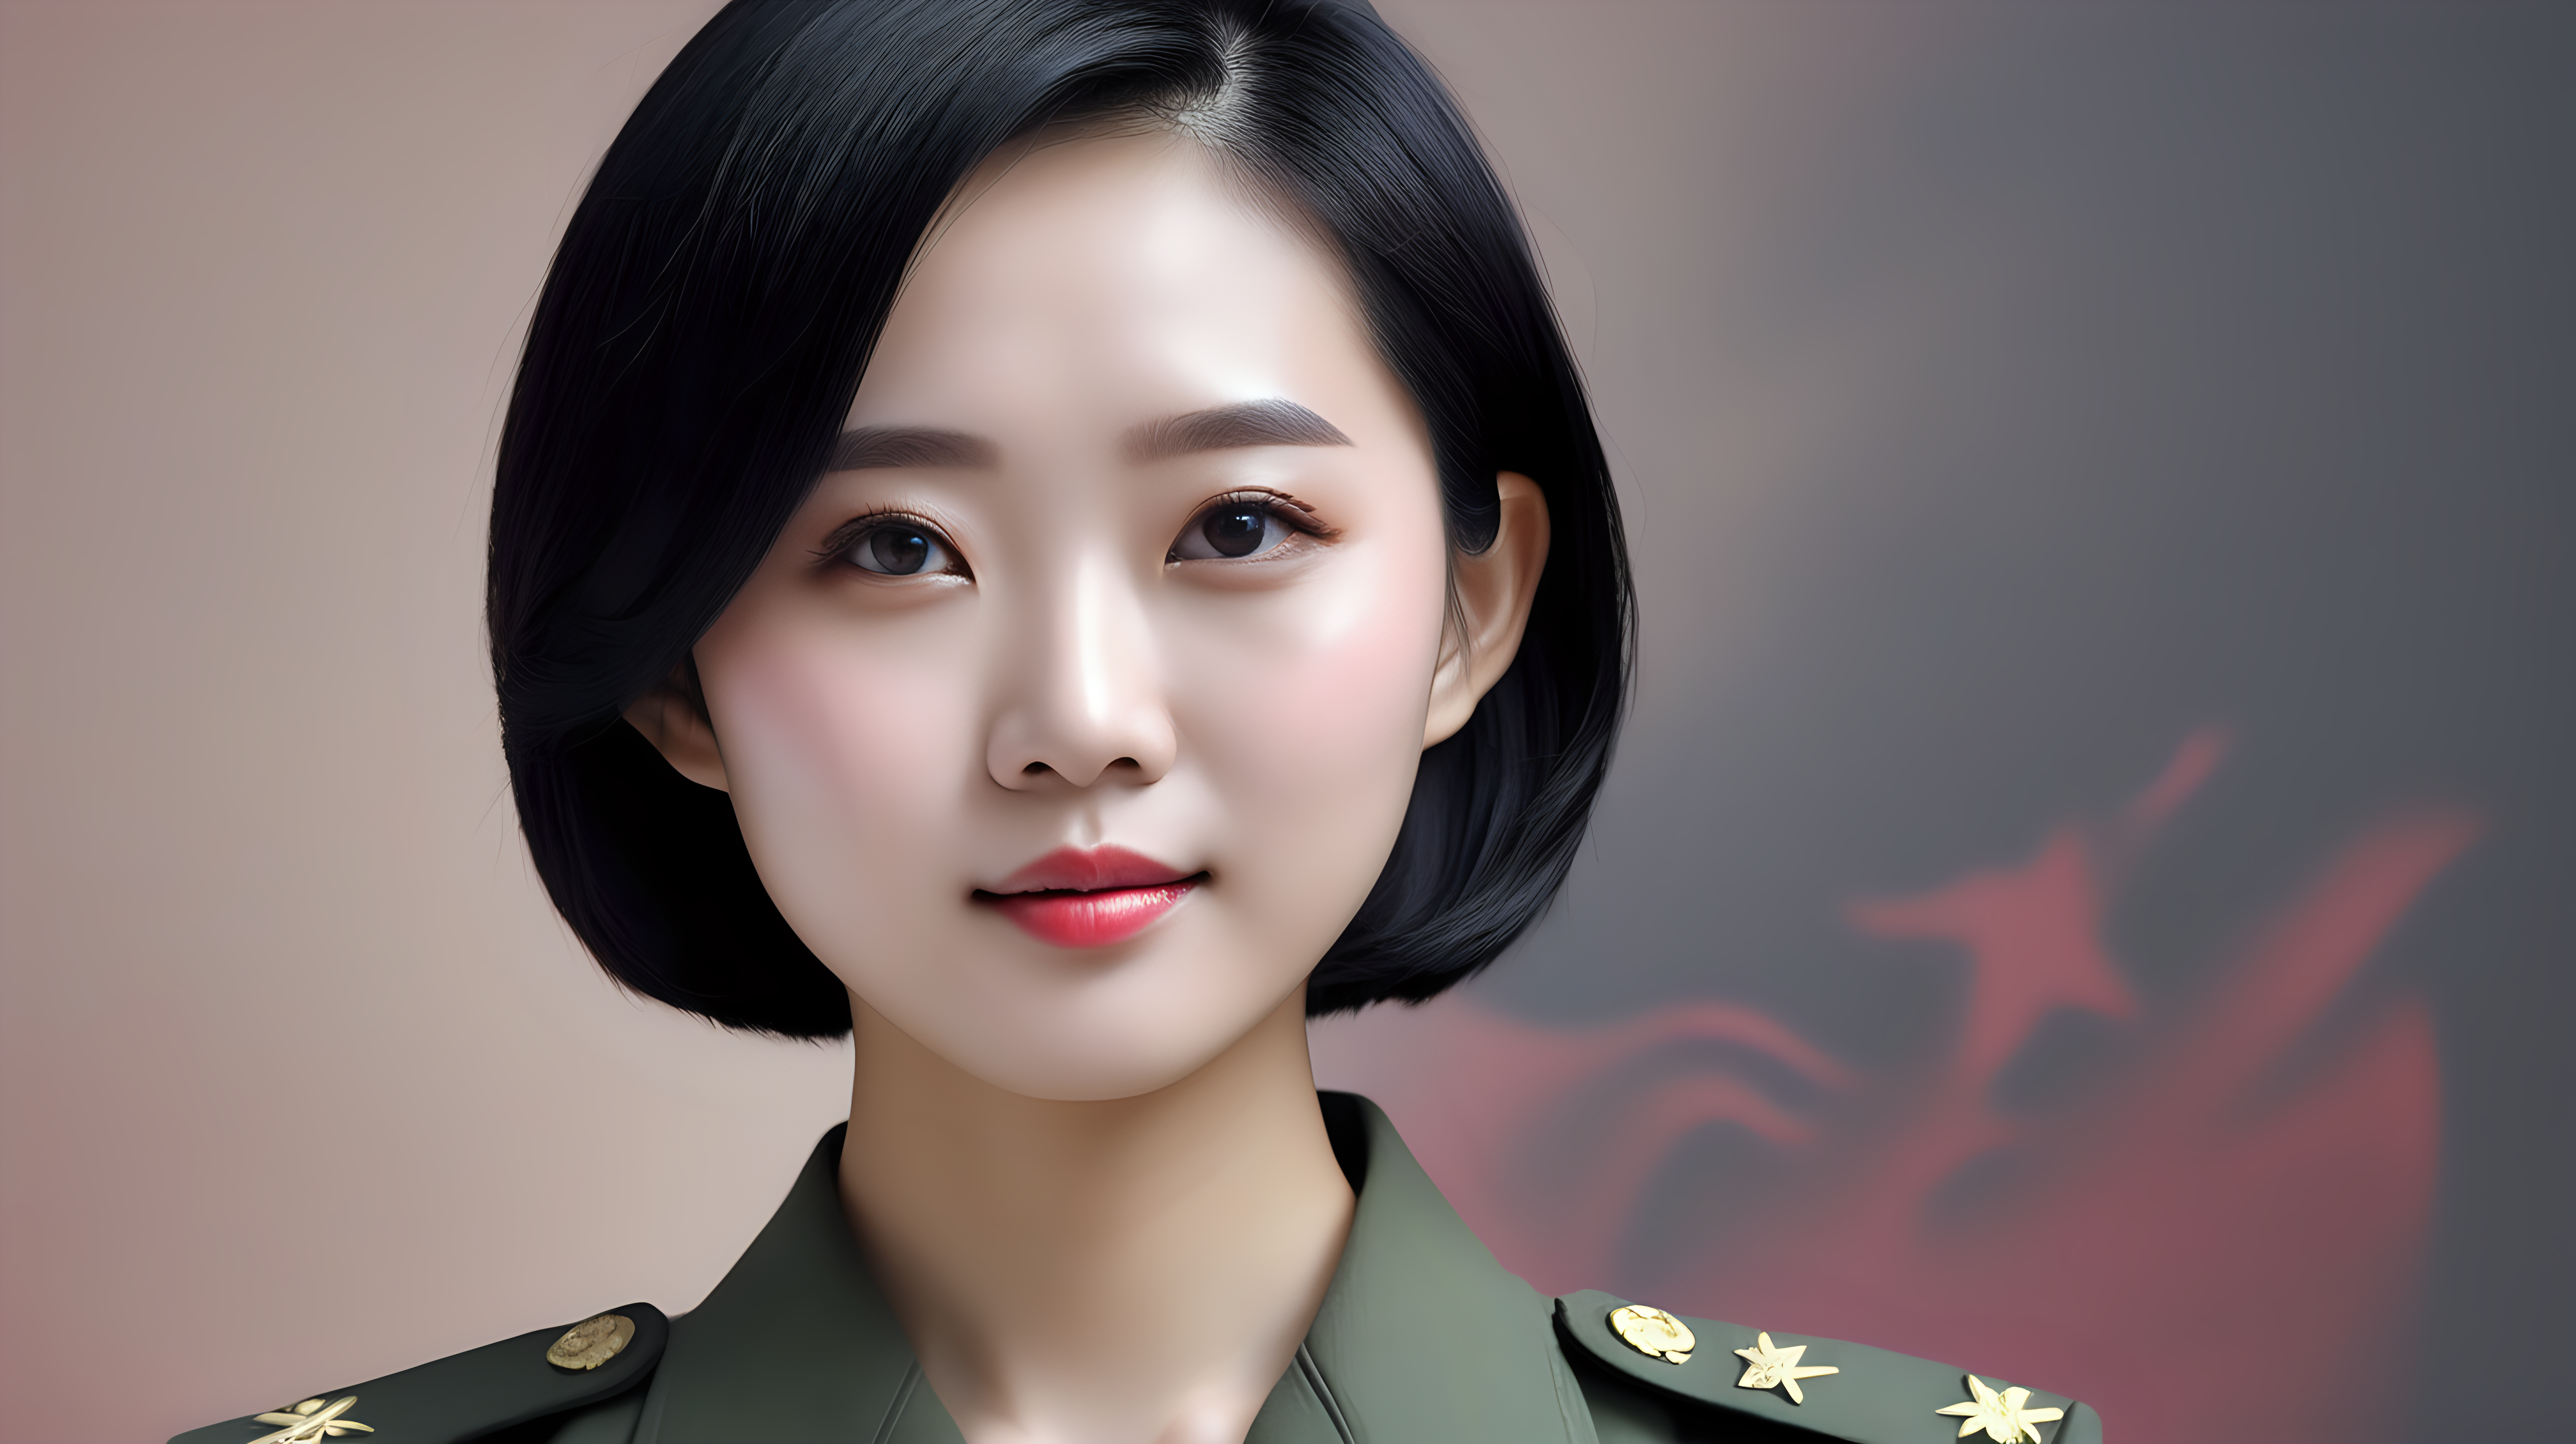 A Chinese Peoples Liberation Army female soldierYouthBlack hairShort